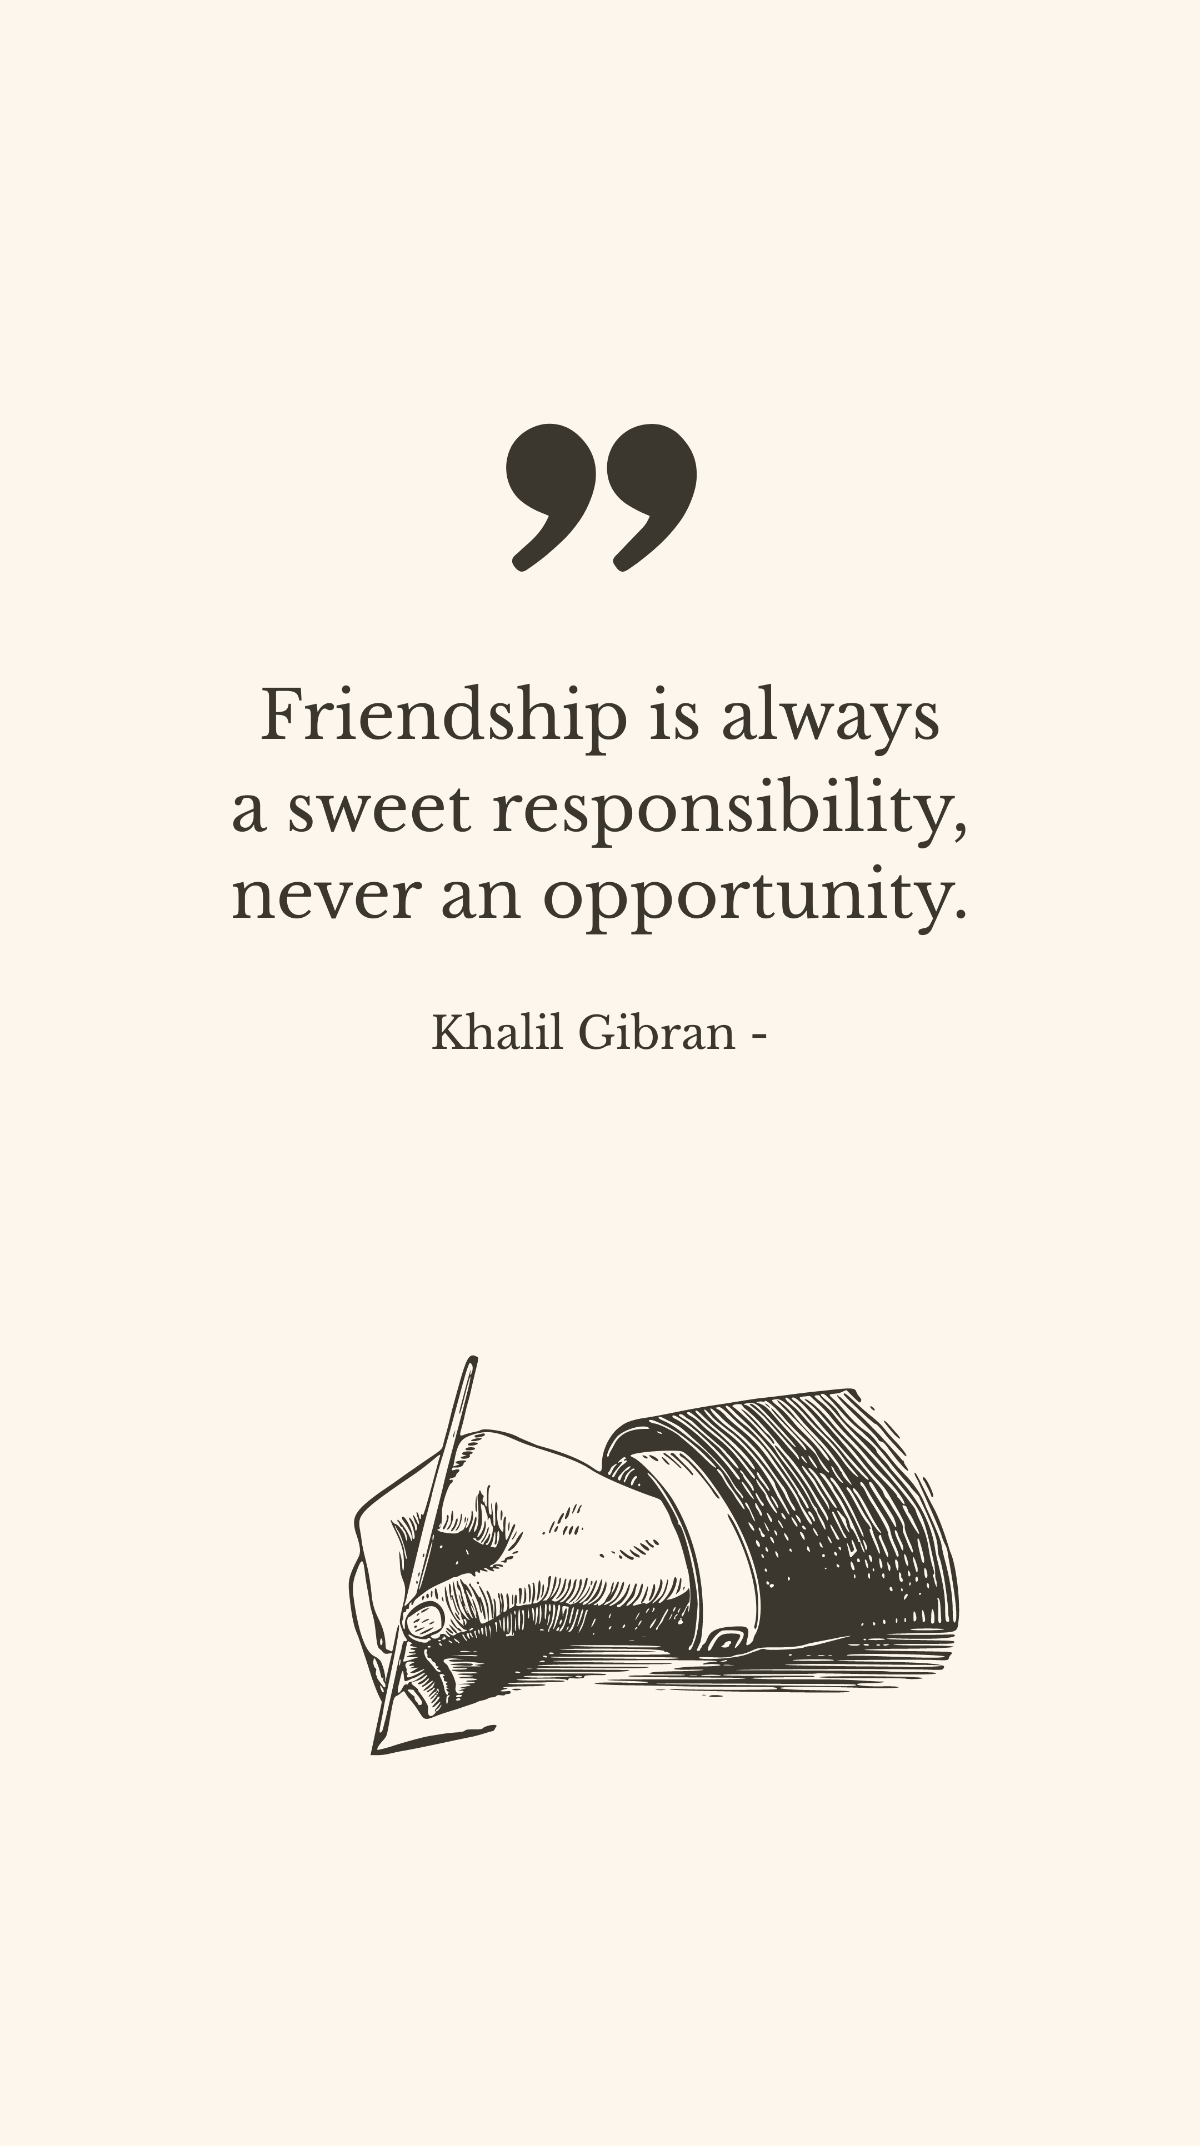 Khalil Gibran - Friendship is always a sweet responsibility, never an opportunity. Template